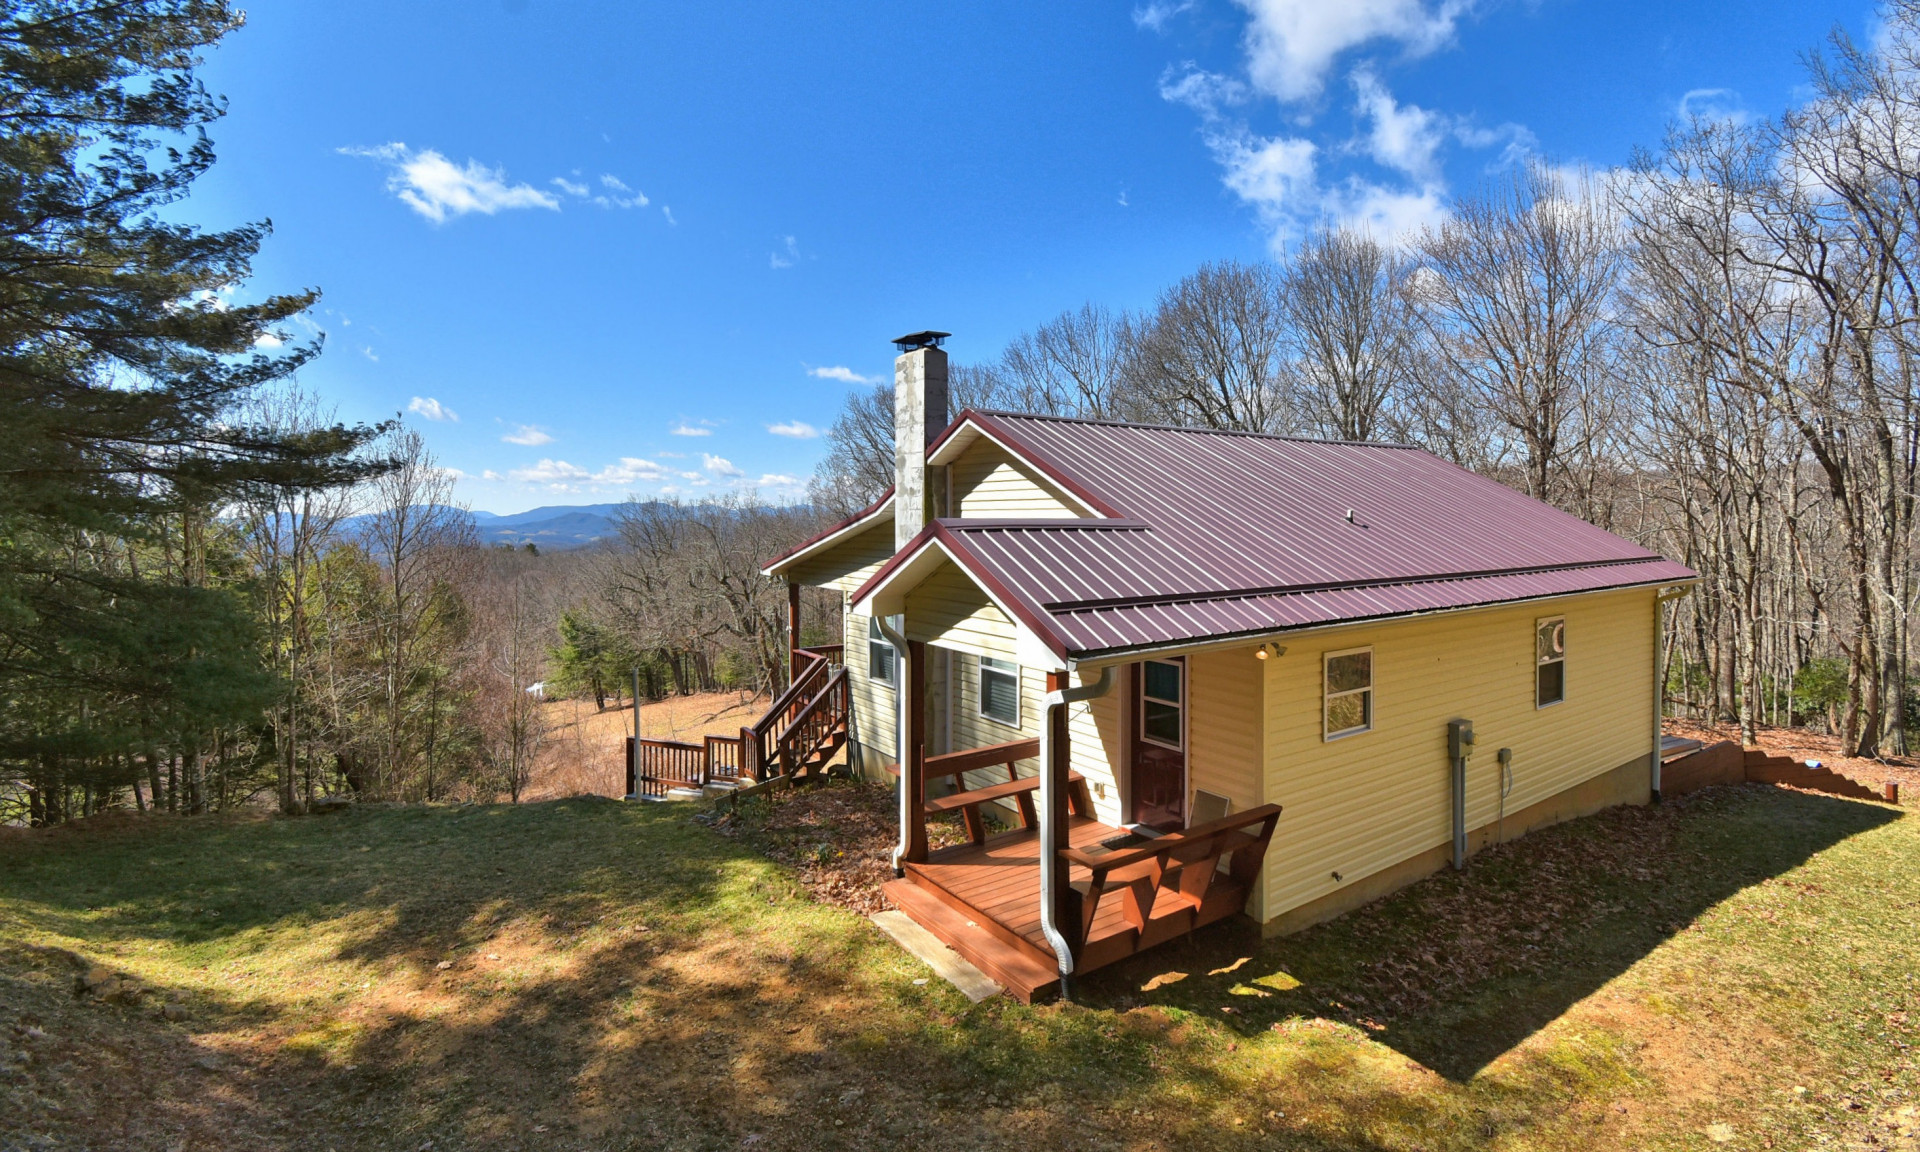 Enjoy Private mountain living and fabulous long range layered views with this sweet 2-bedroom, 2-bath mountain cottage nestled among 6.95 acres in Kindrick Mountain, a private gated community in the Mouth of Wilson area of Grayson County of Southwest Virginia.